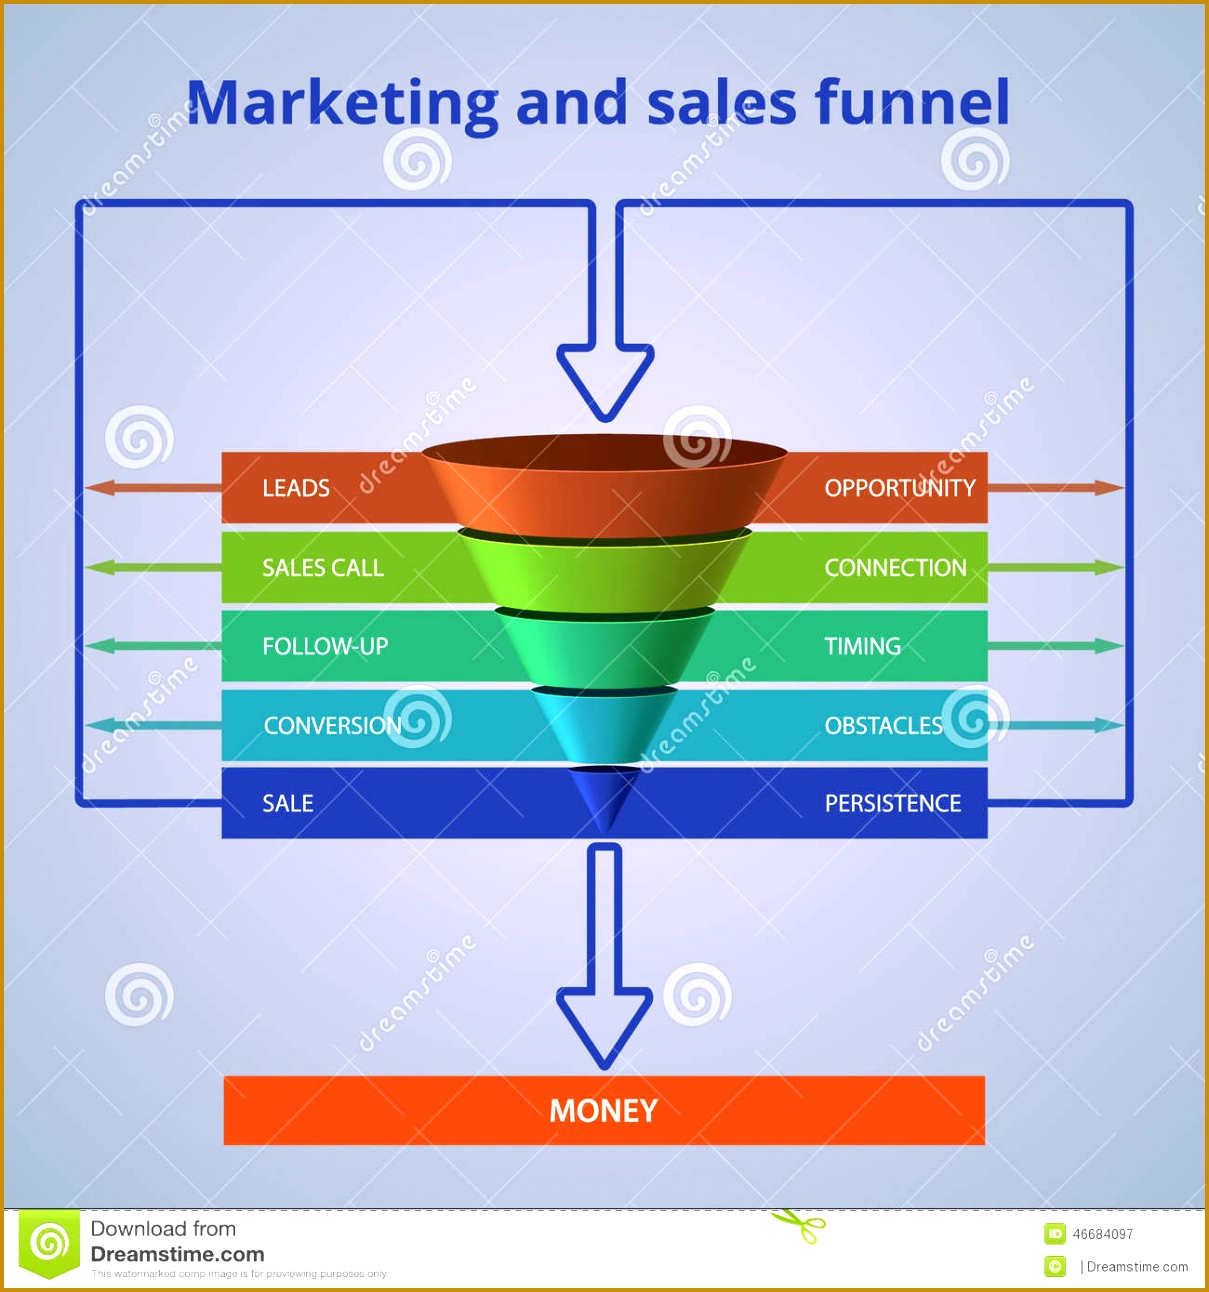 Sales funnel template for your business presentation 12921209